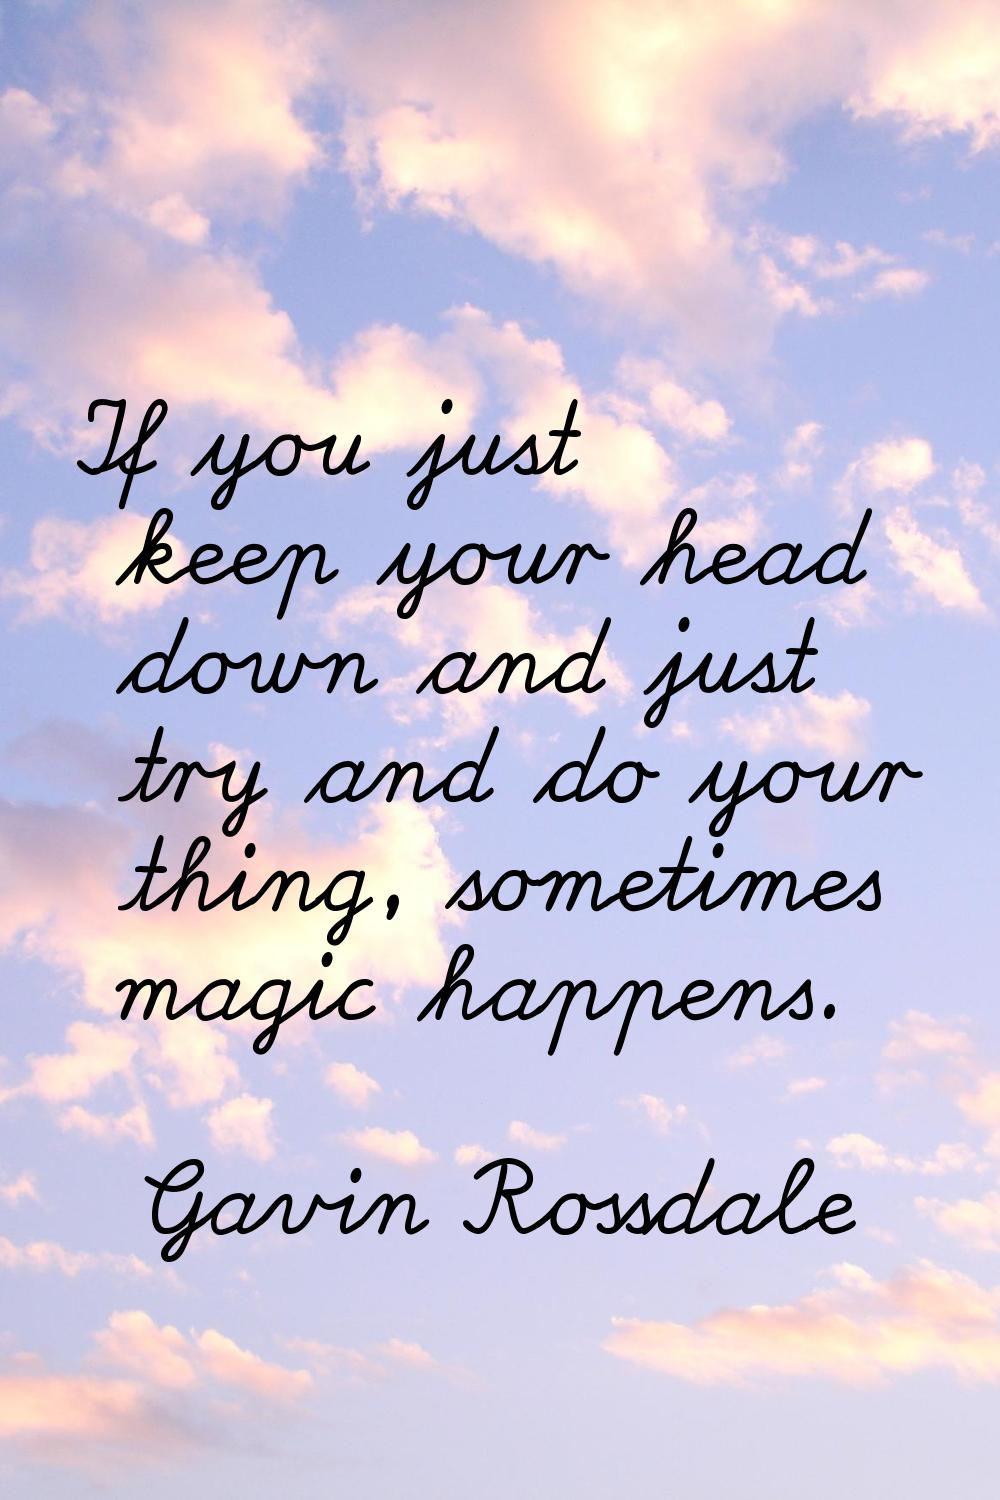 If you just keep your head down and just try and do your thing, sometimes magic happens.